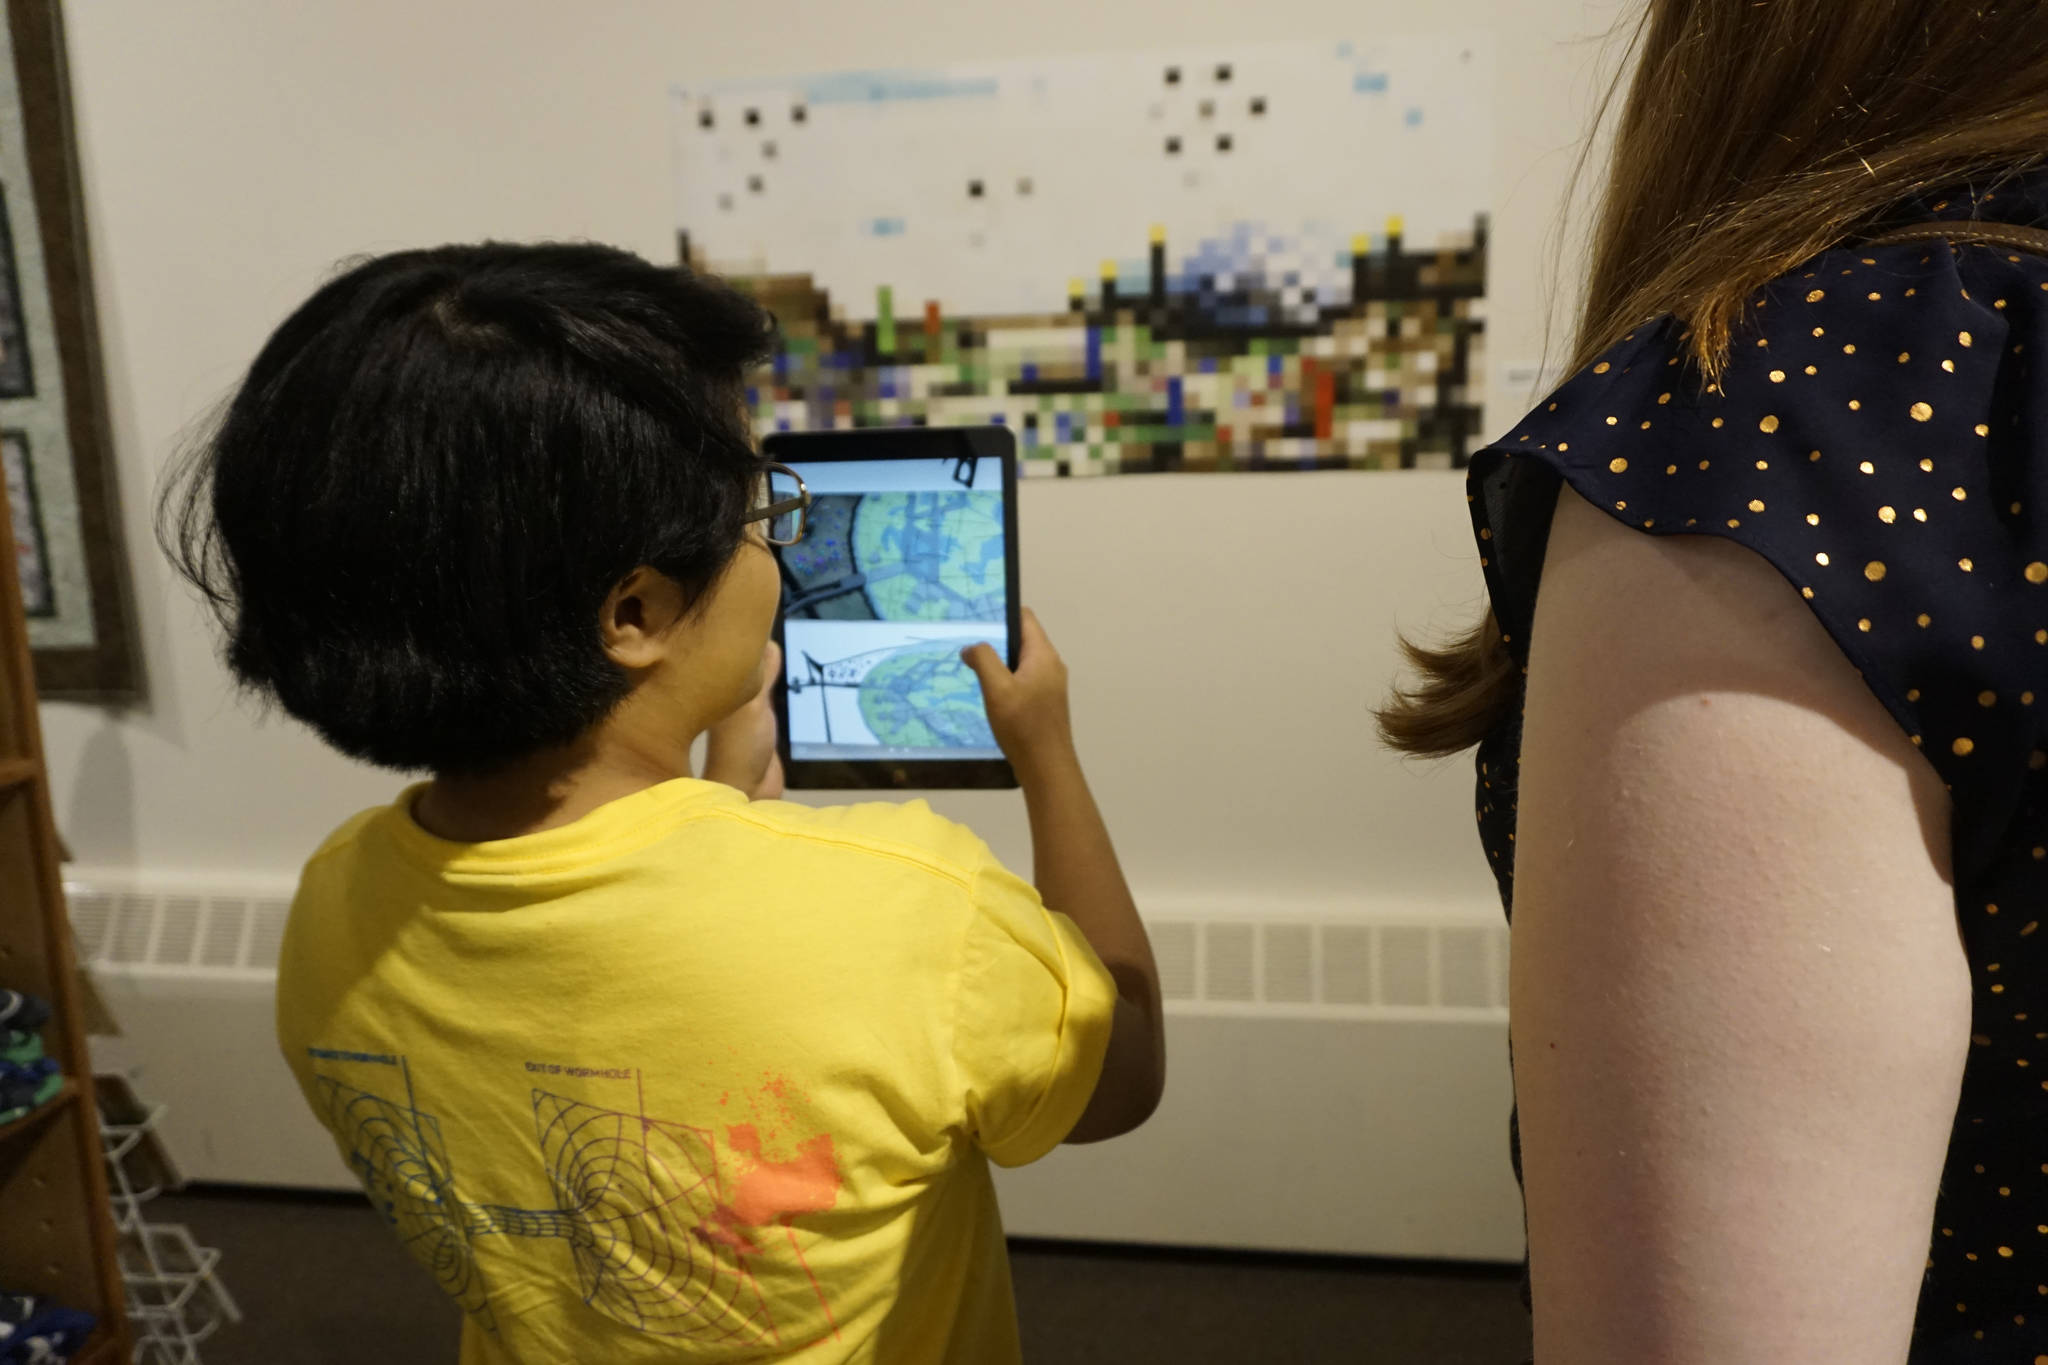 Chloe Adkison views an image in an iPad from the “Dirigibles of Denali” show at the Pratt Museum at the July 6, 2018 First Friday opening in Homer, Alaska. The images appear when viewed through the HP Reveal augmented reality app. (Photo by Michael Armstrong/Homer News)